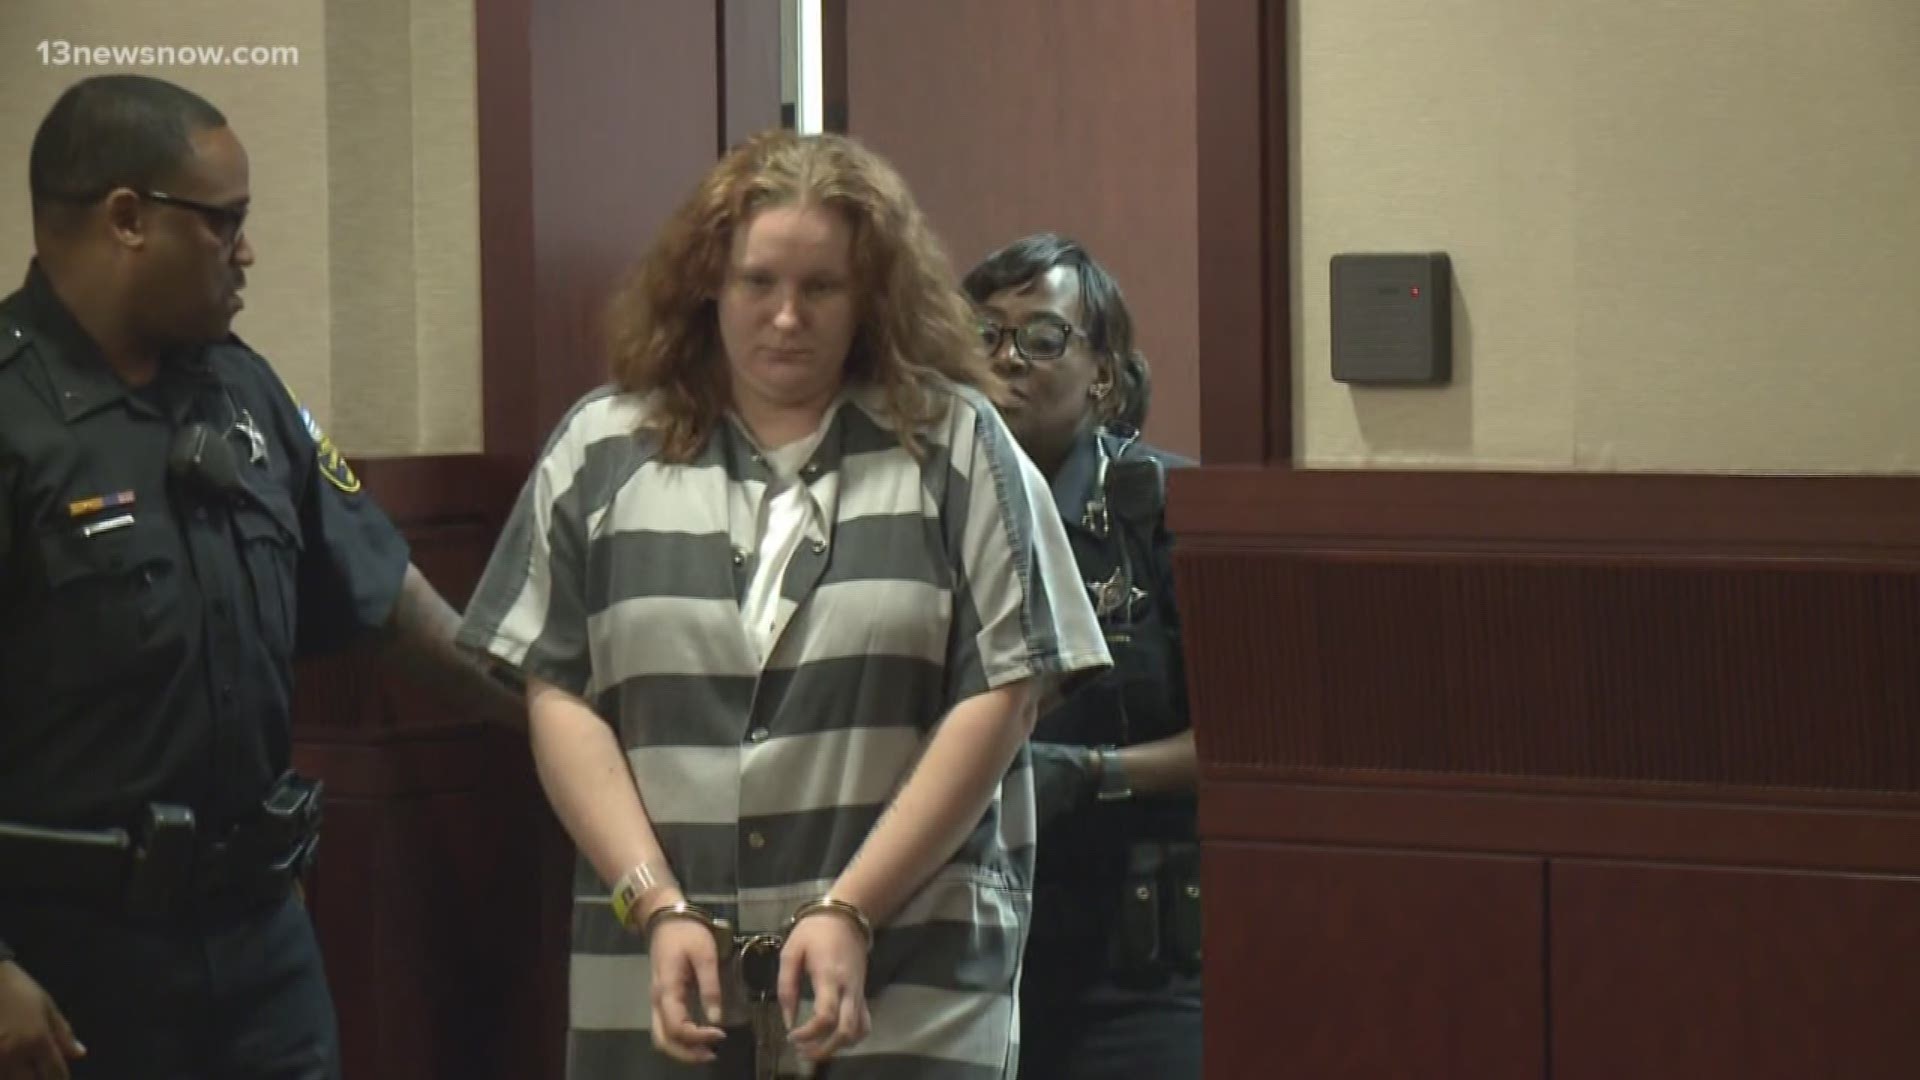 Catherine Seals is charged with one count of felony child neglect after her teen son was charged with murdering a four-year-old child.